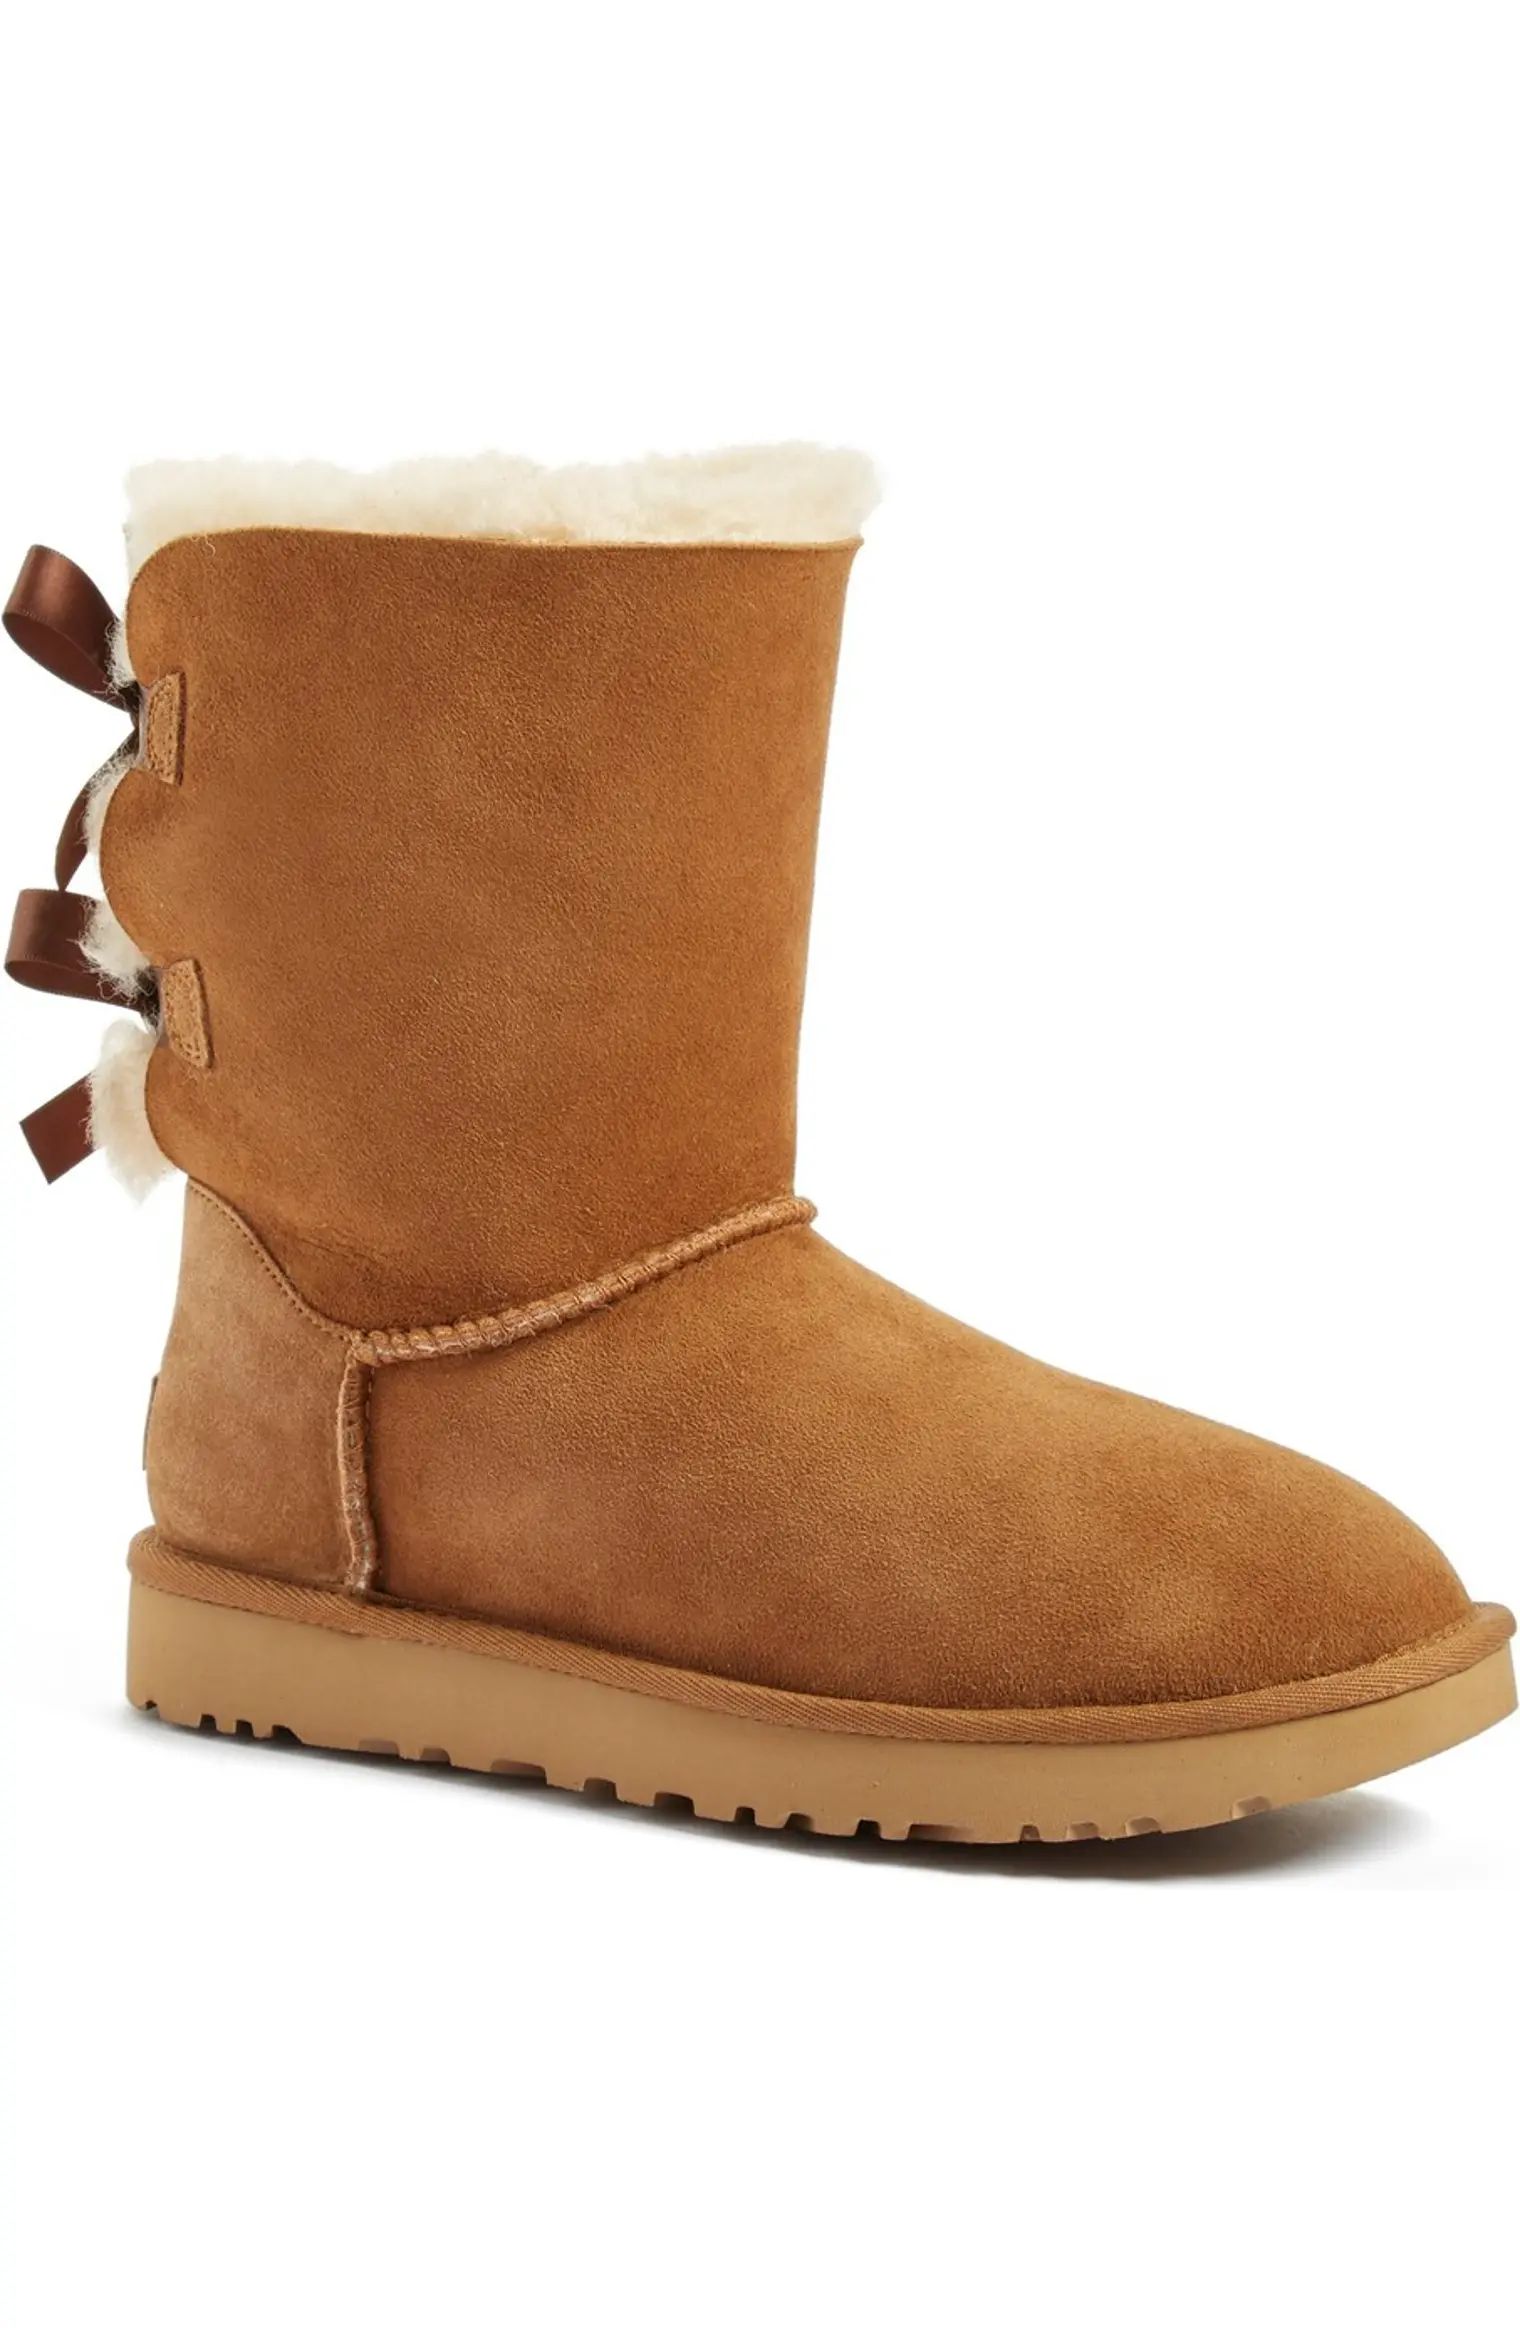 Bailey Bow II Genuine Shearling Boot | Nordstrom